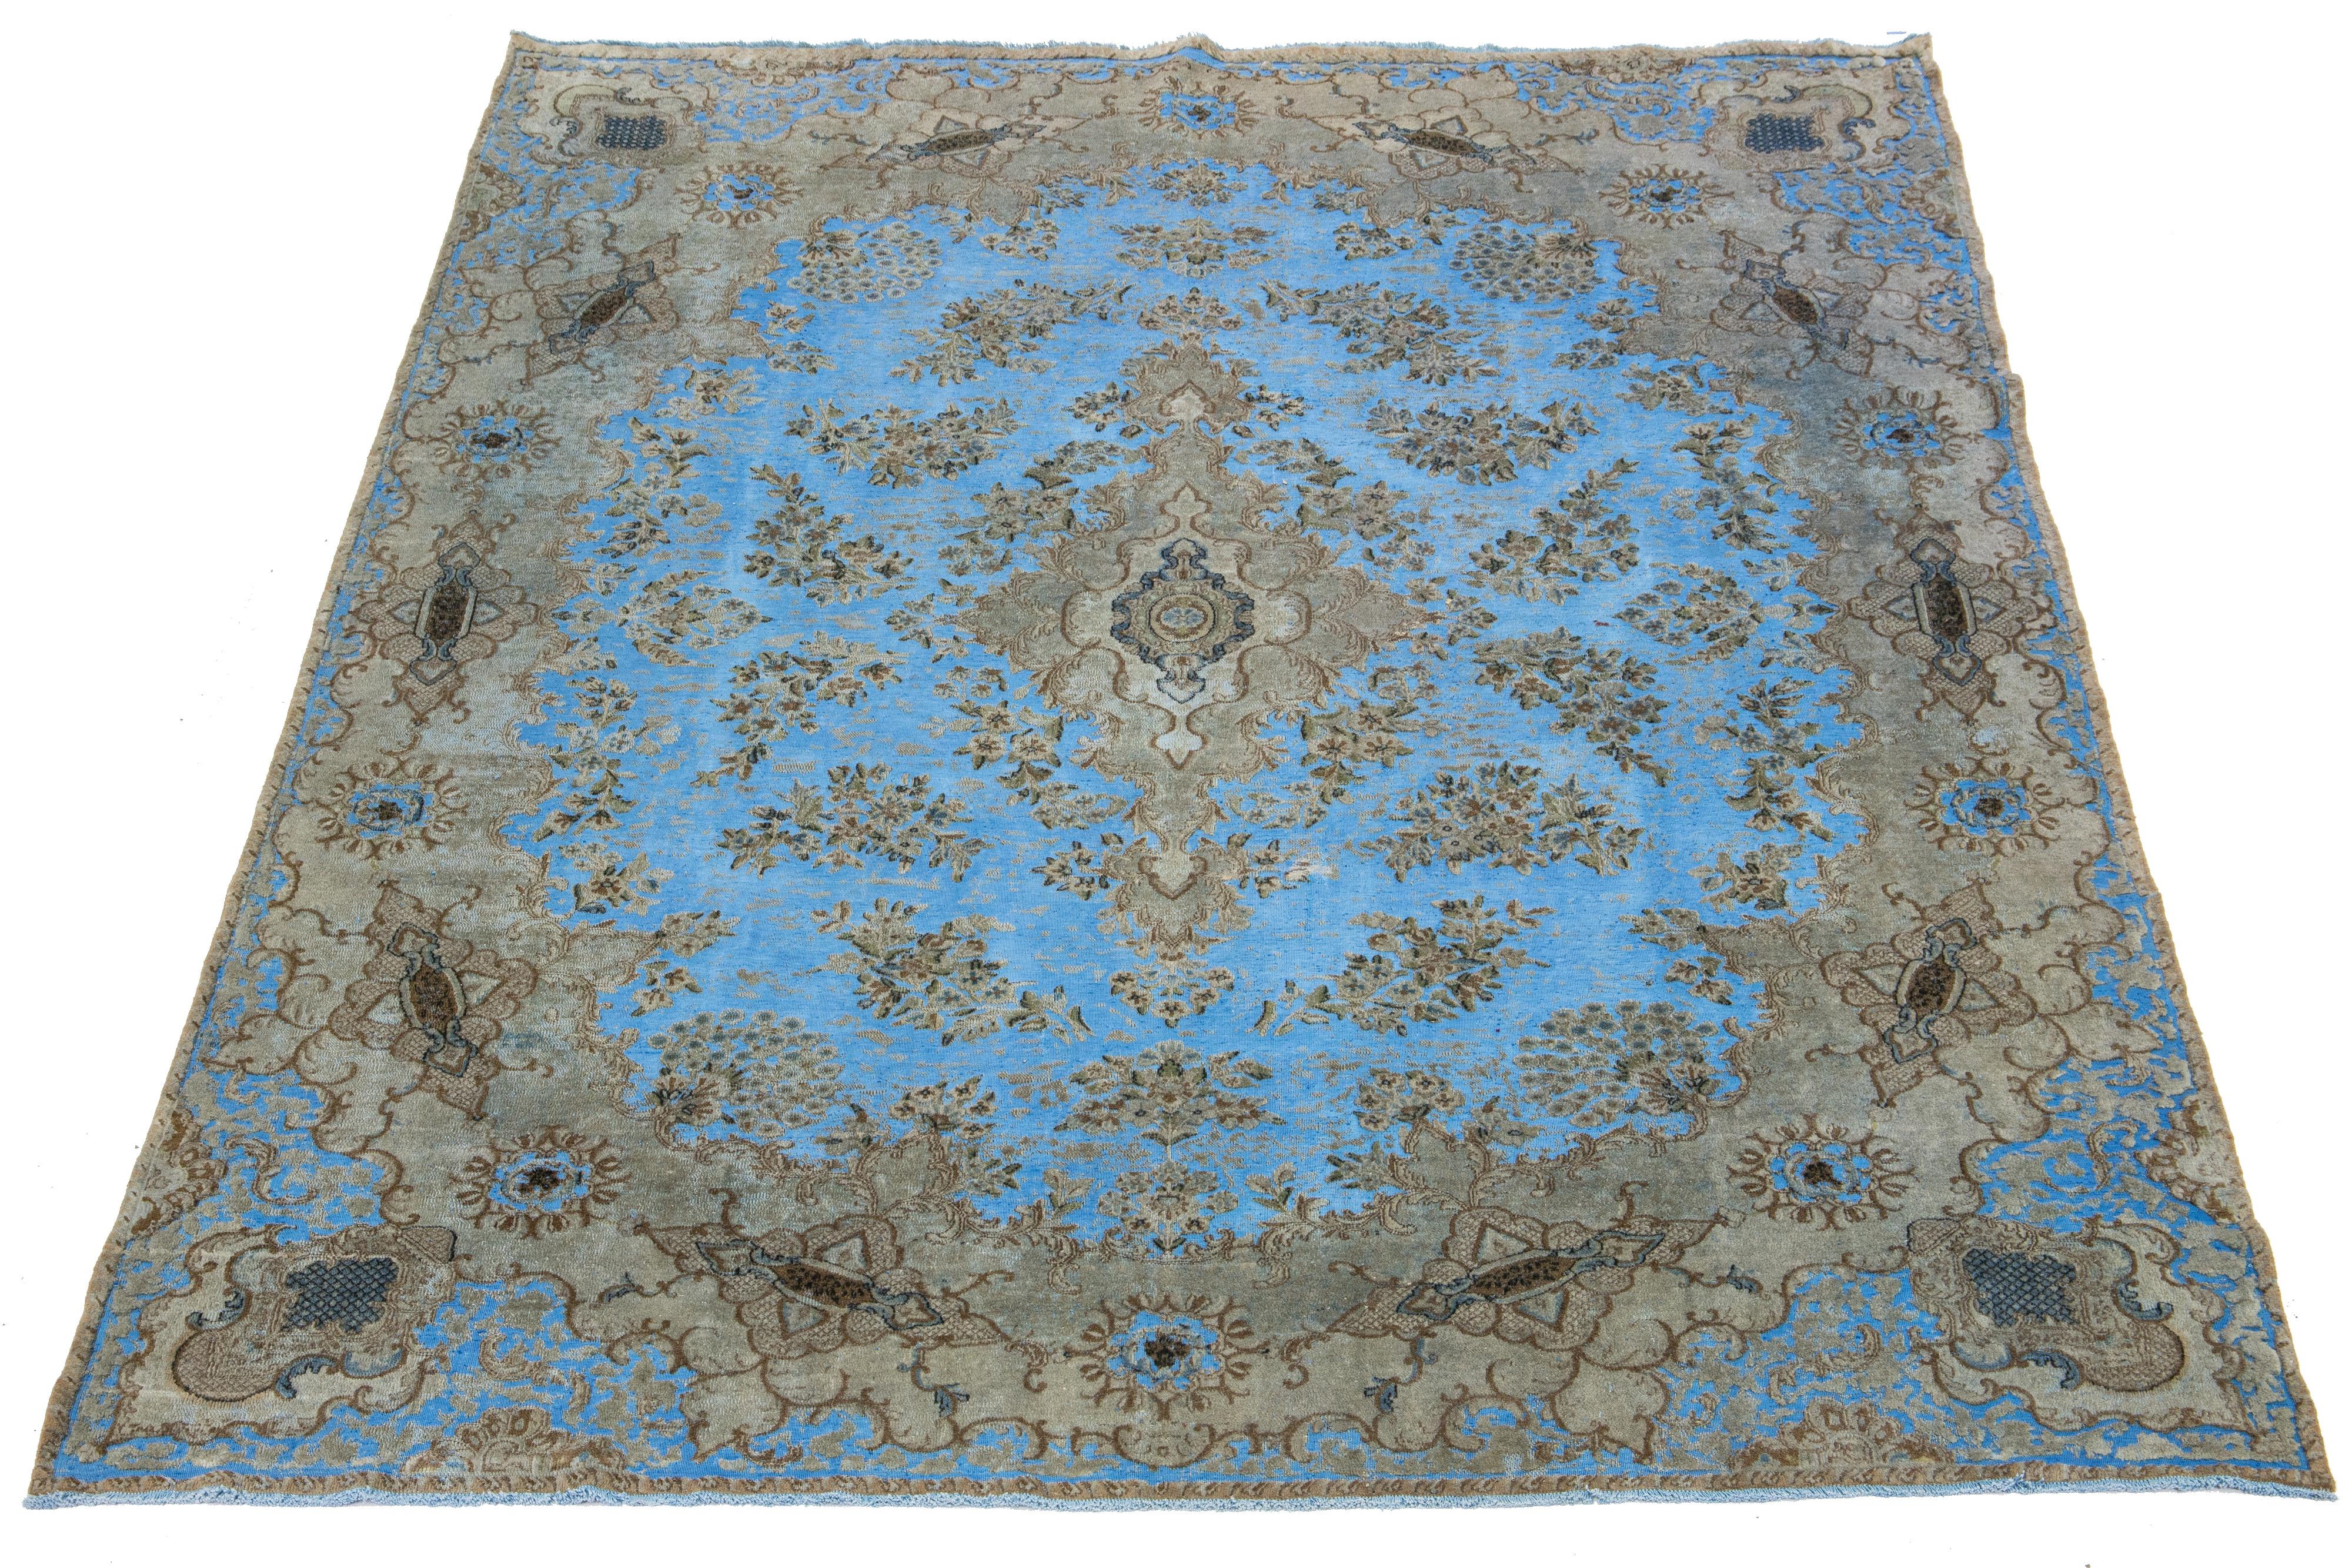 This antique Persian wool rug features a medallion floral design in light blue with beige and brown accents, all hand-knotted to perfection.

This rug measures 8'9'' x 12'3